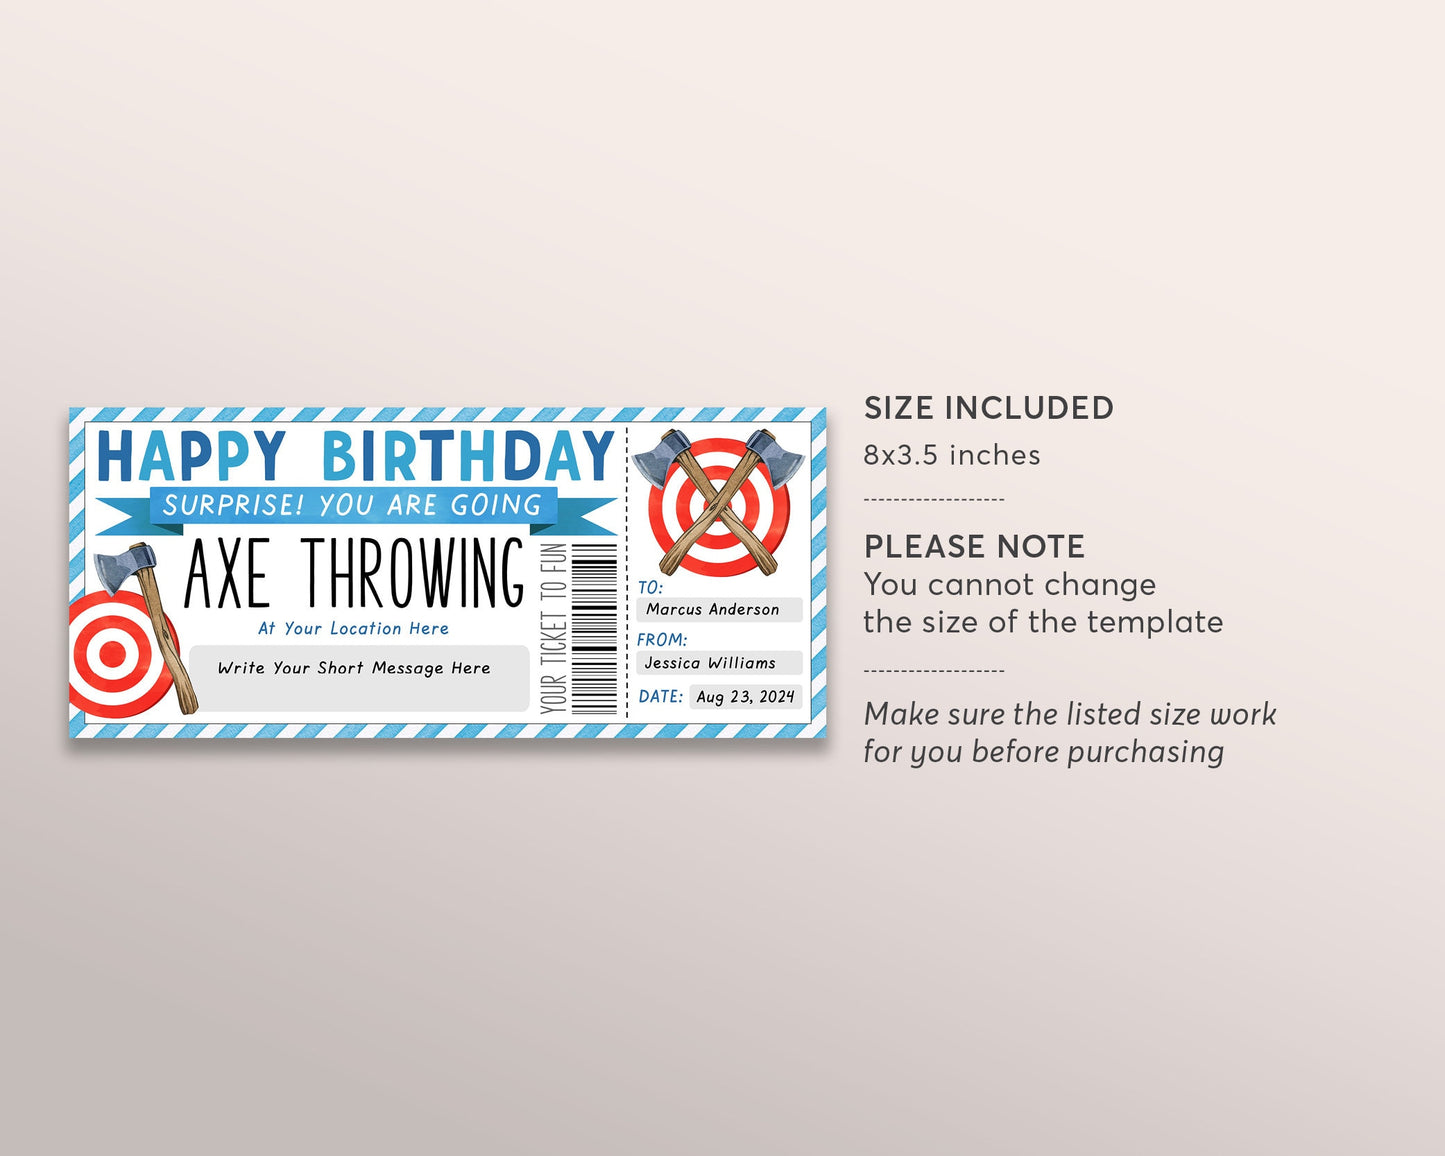 Axe Throwing Gift Certificate Ticket Editable Template, Birthday Surprise Hatchet Throwing Experience Gift Voucher Holiday Coupon For Him